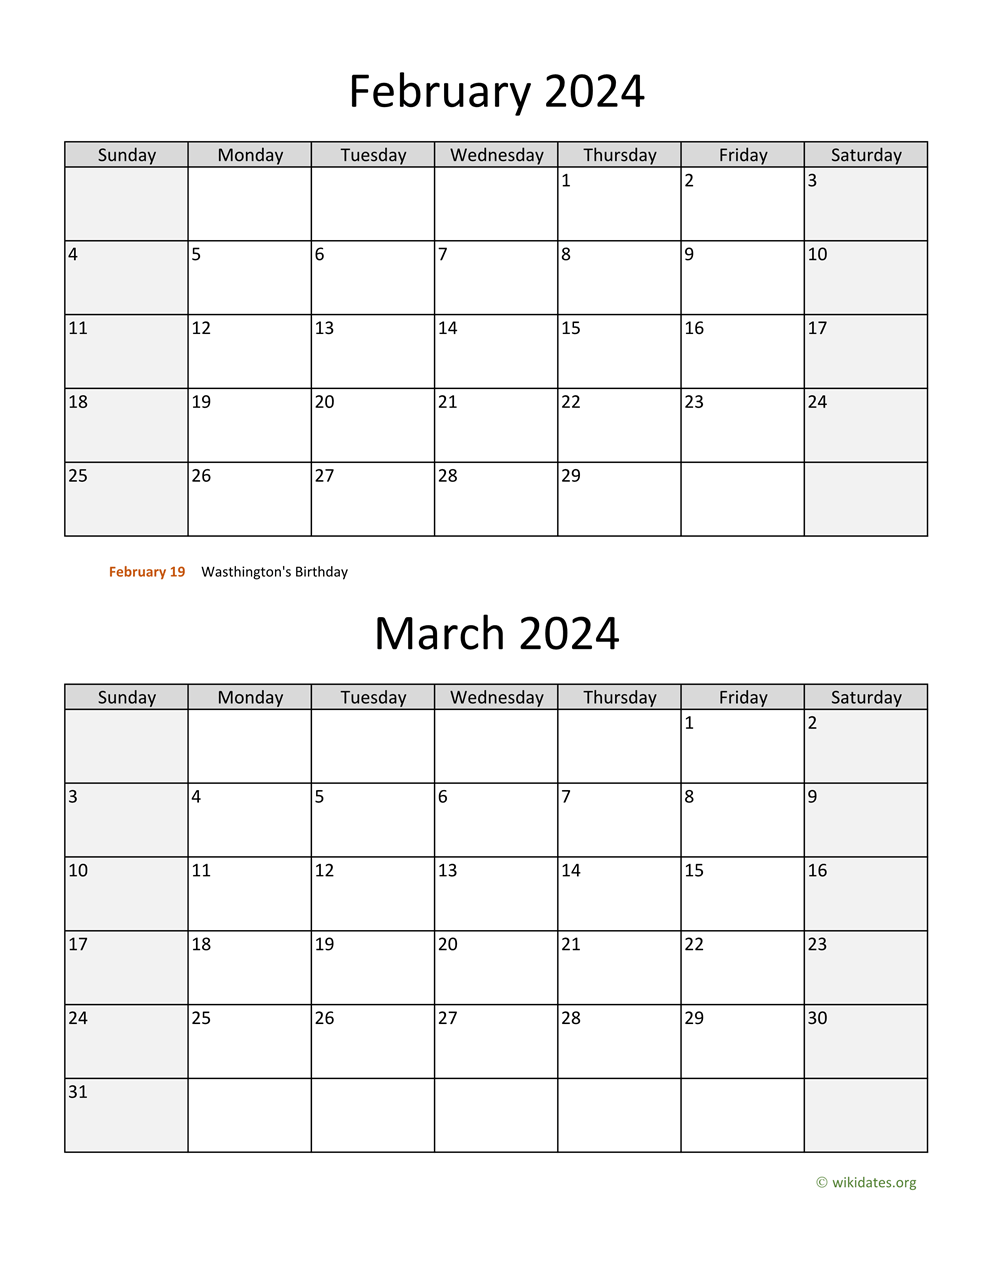 February And March 2024 Calendar | Wikidates for Printable Calendar February And March 2024